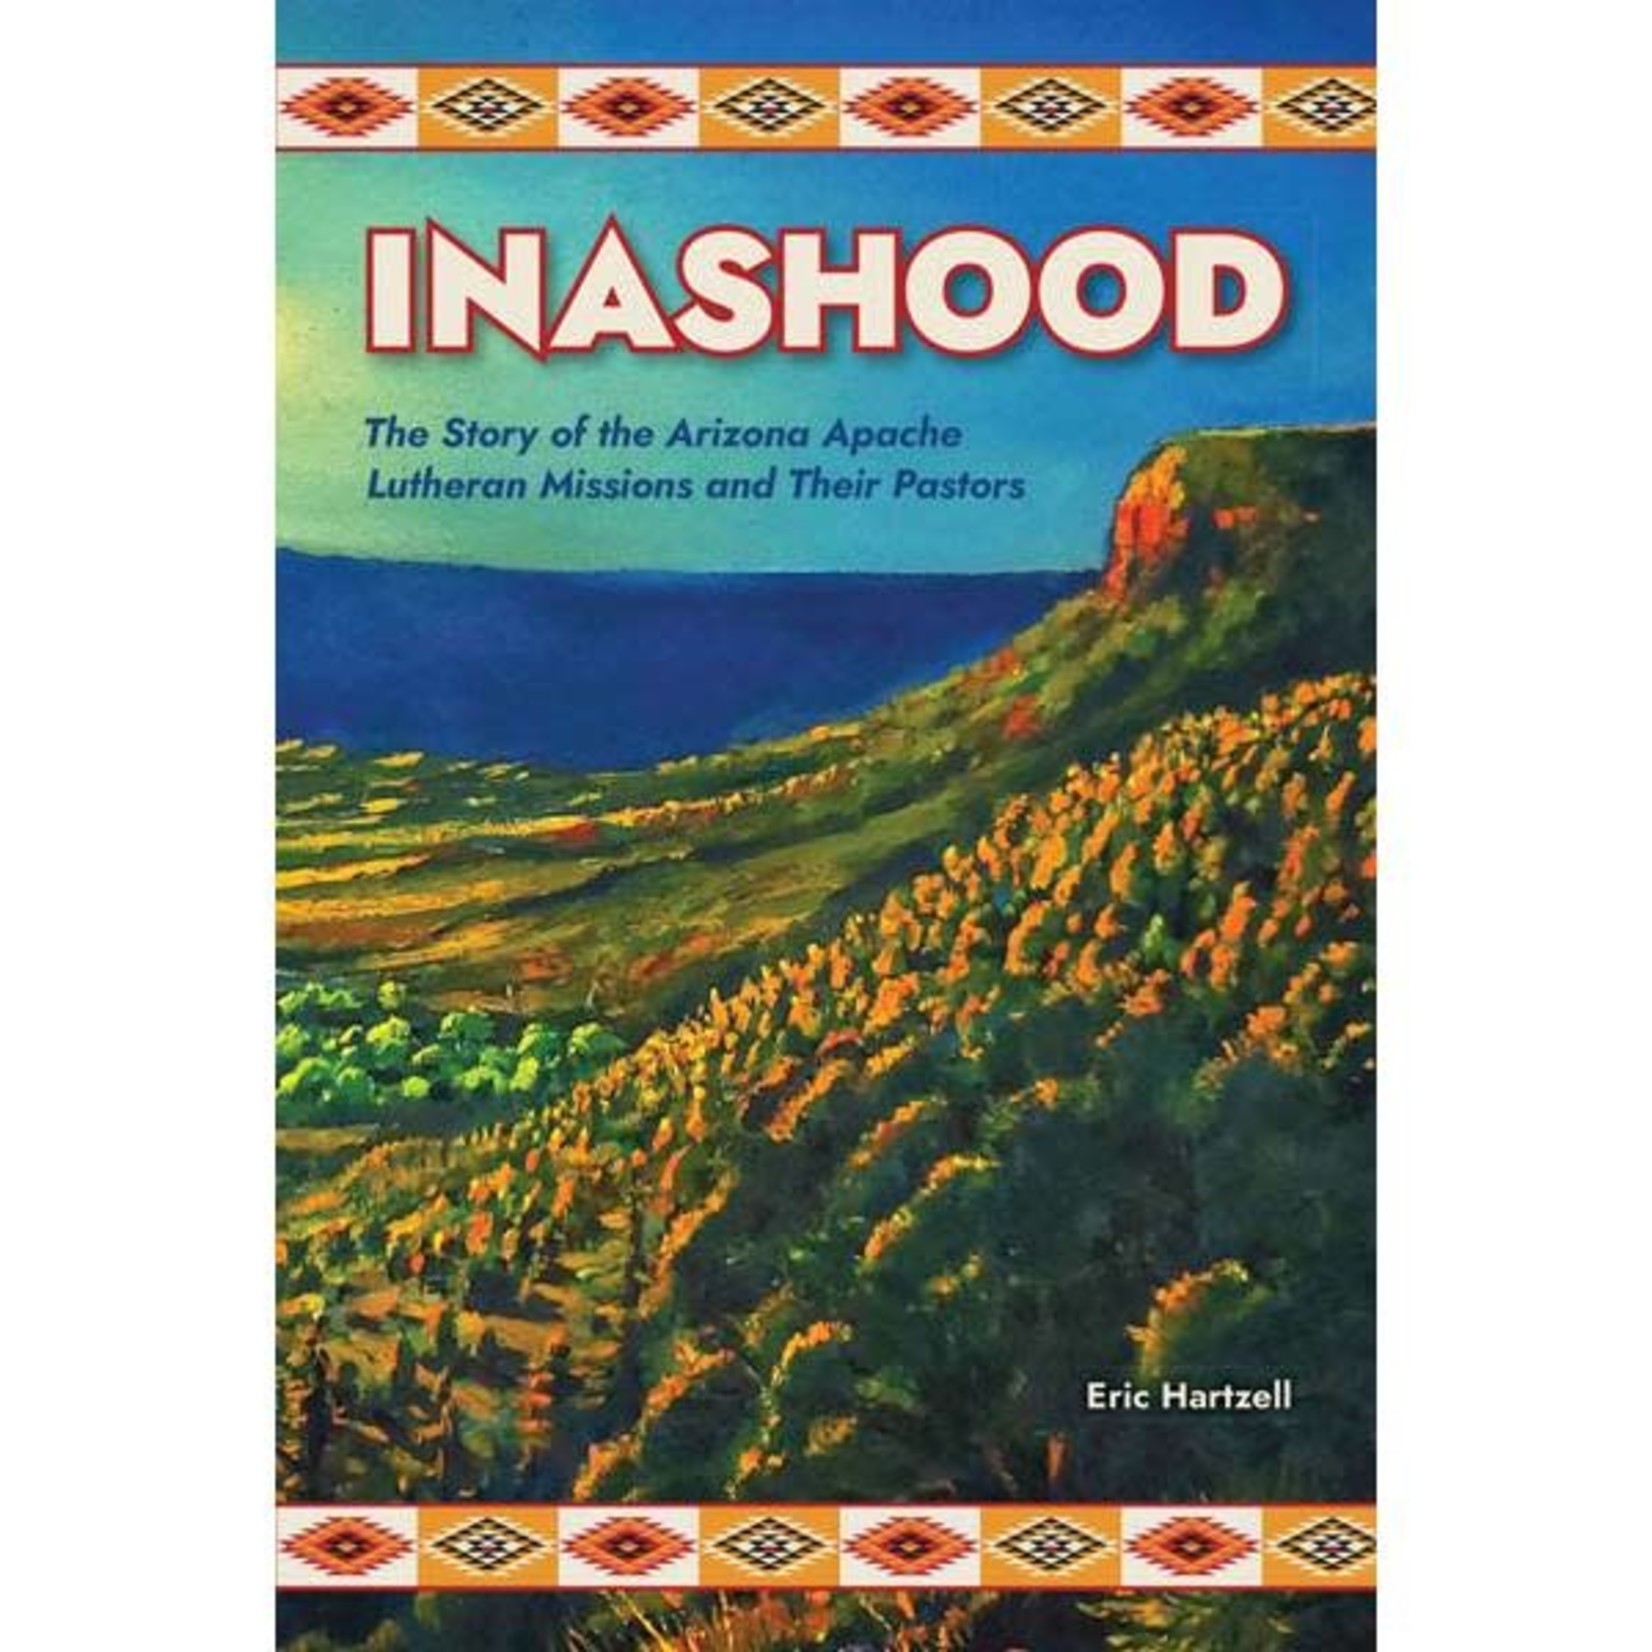 Inashood - The Storyof the Arizona Apache Lutheran Missions and Their Pastors